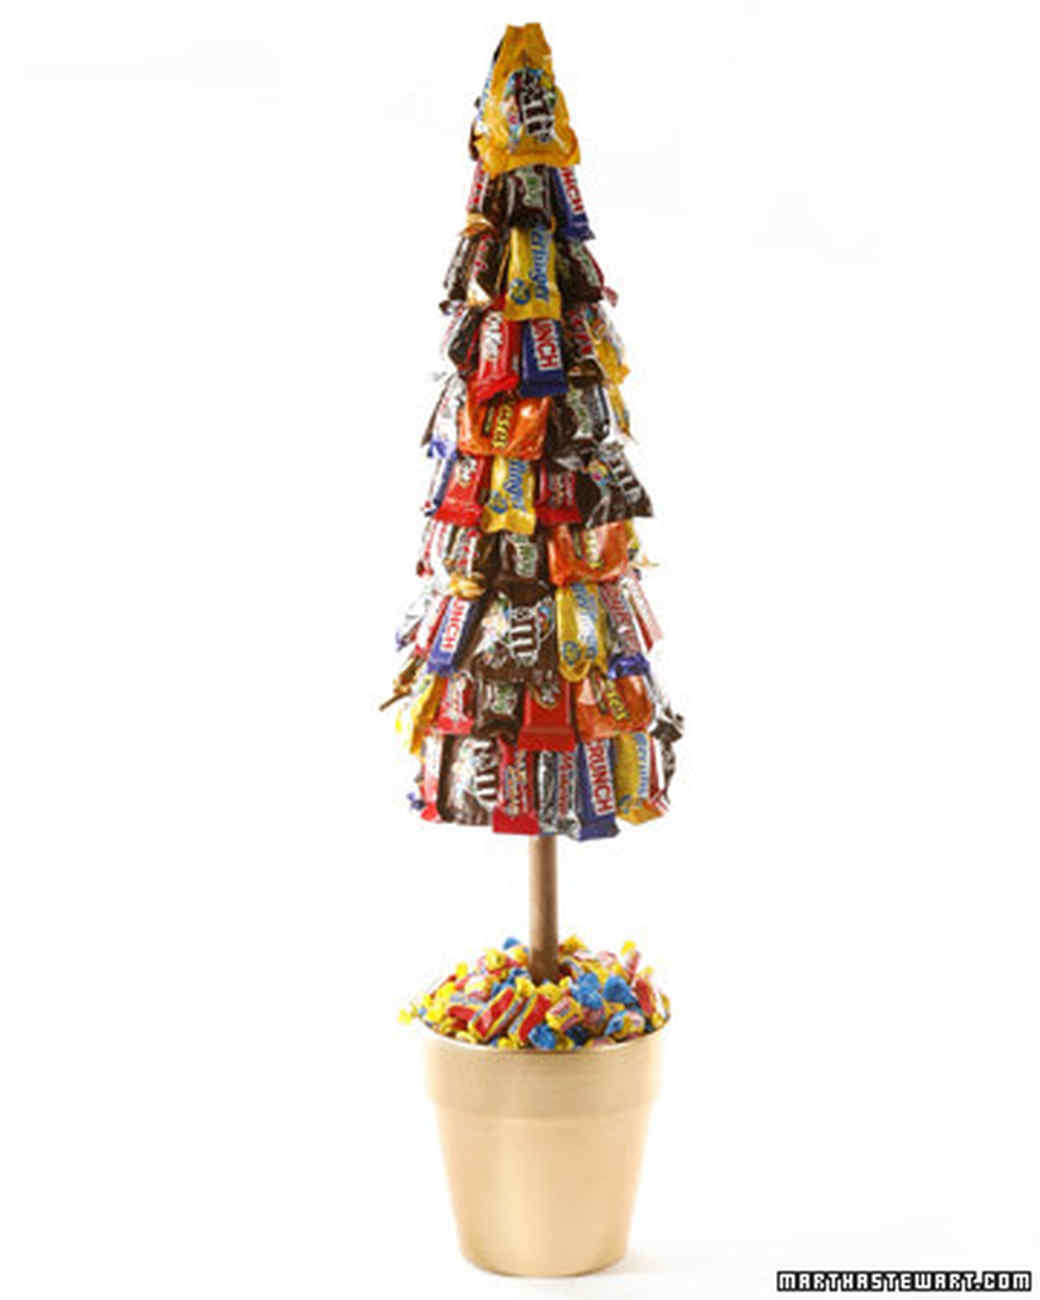 Candy Bar Christmas Tree
 Ultra Creative Candy Centerpieces to Sweeten the